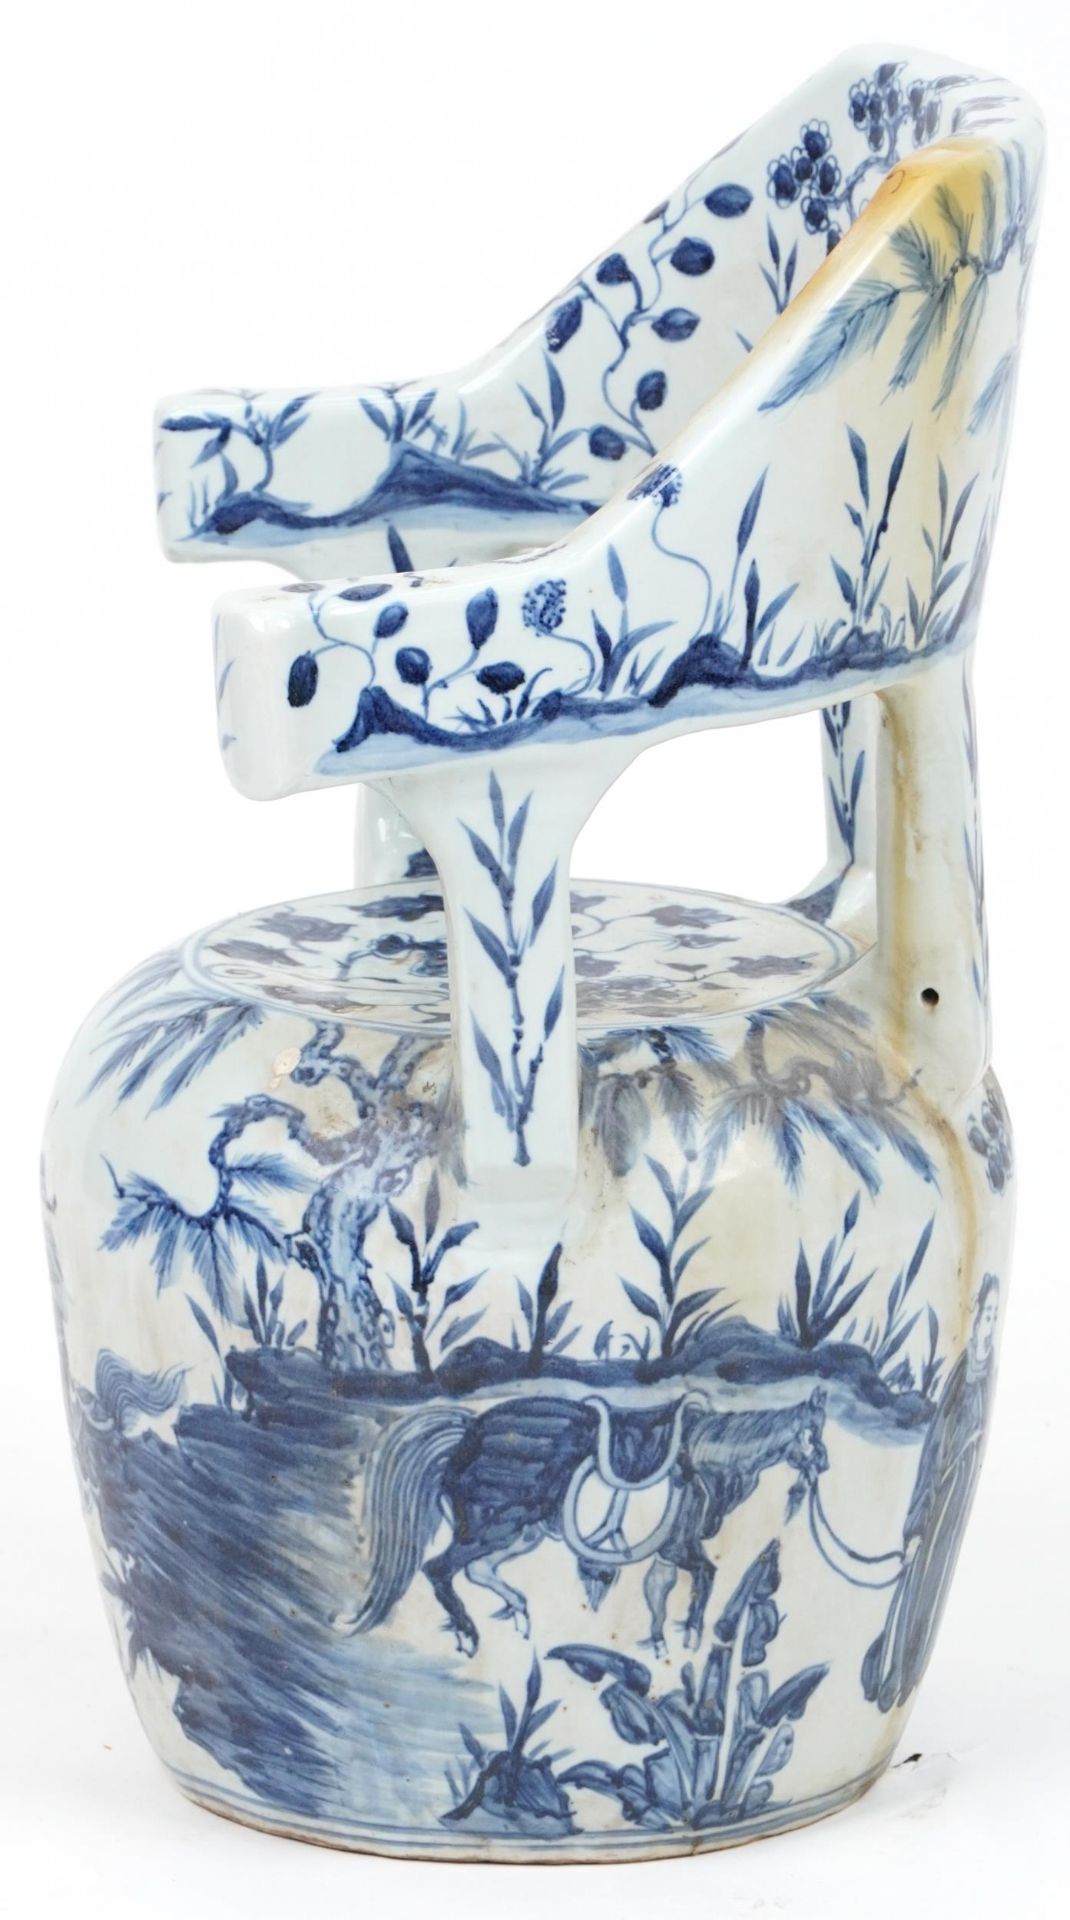 Chinese blue and white porcelain garden seat hand painted with flowers, 65cm high - Image 4 of 7